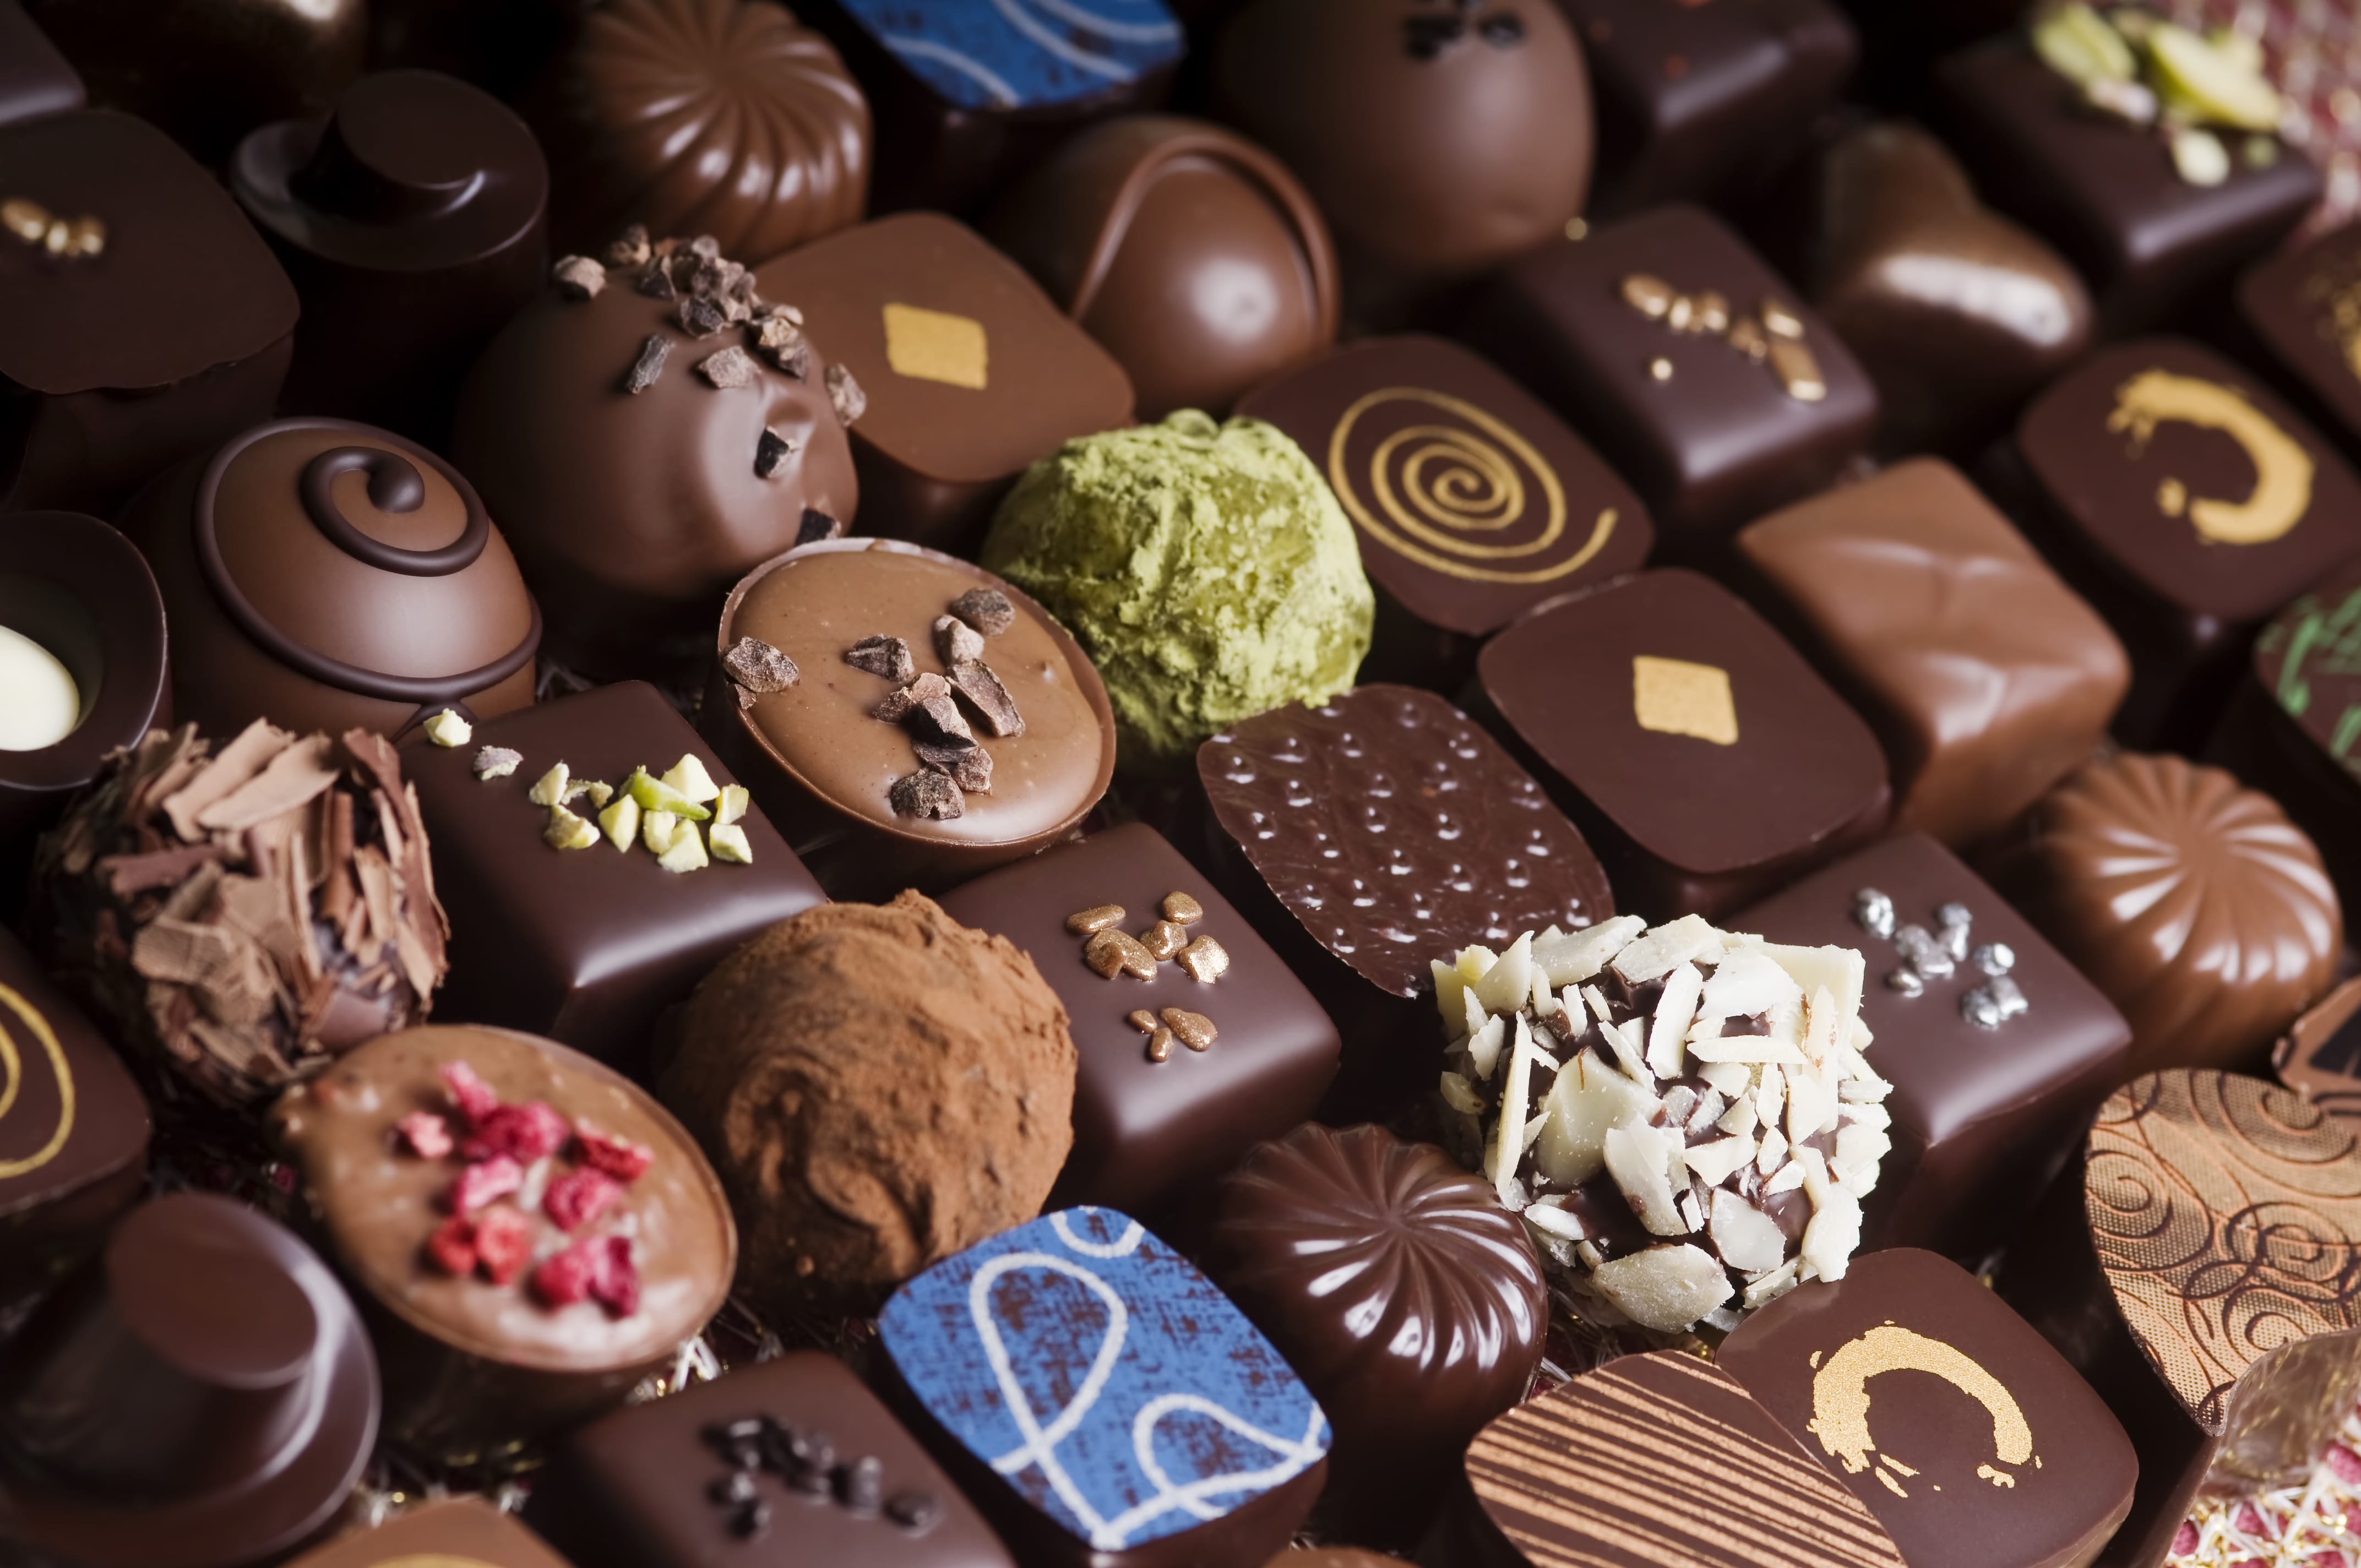 7 Countries That Make The Best Chocolate | WorldStrides